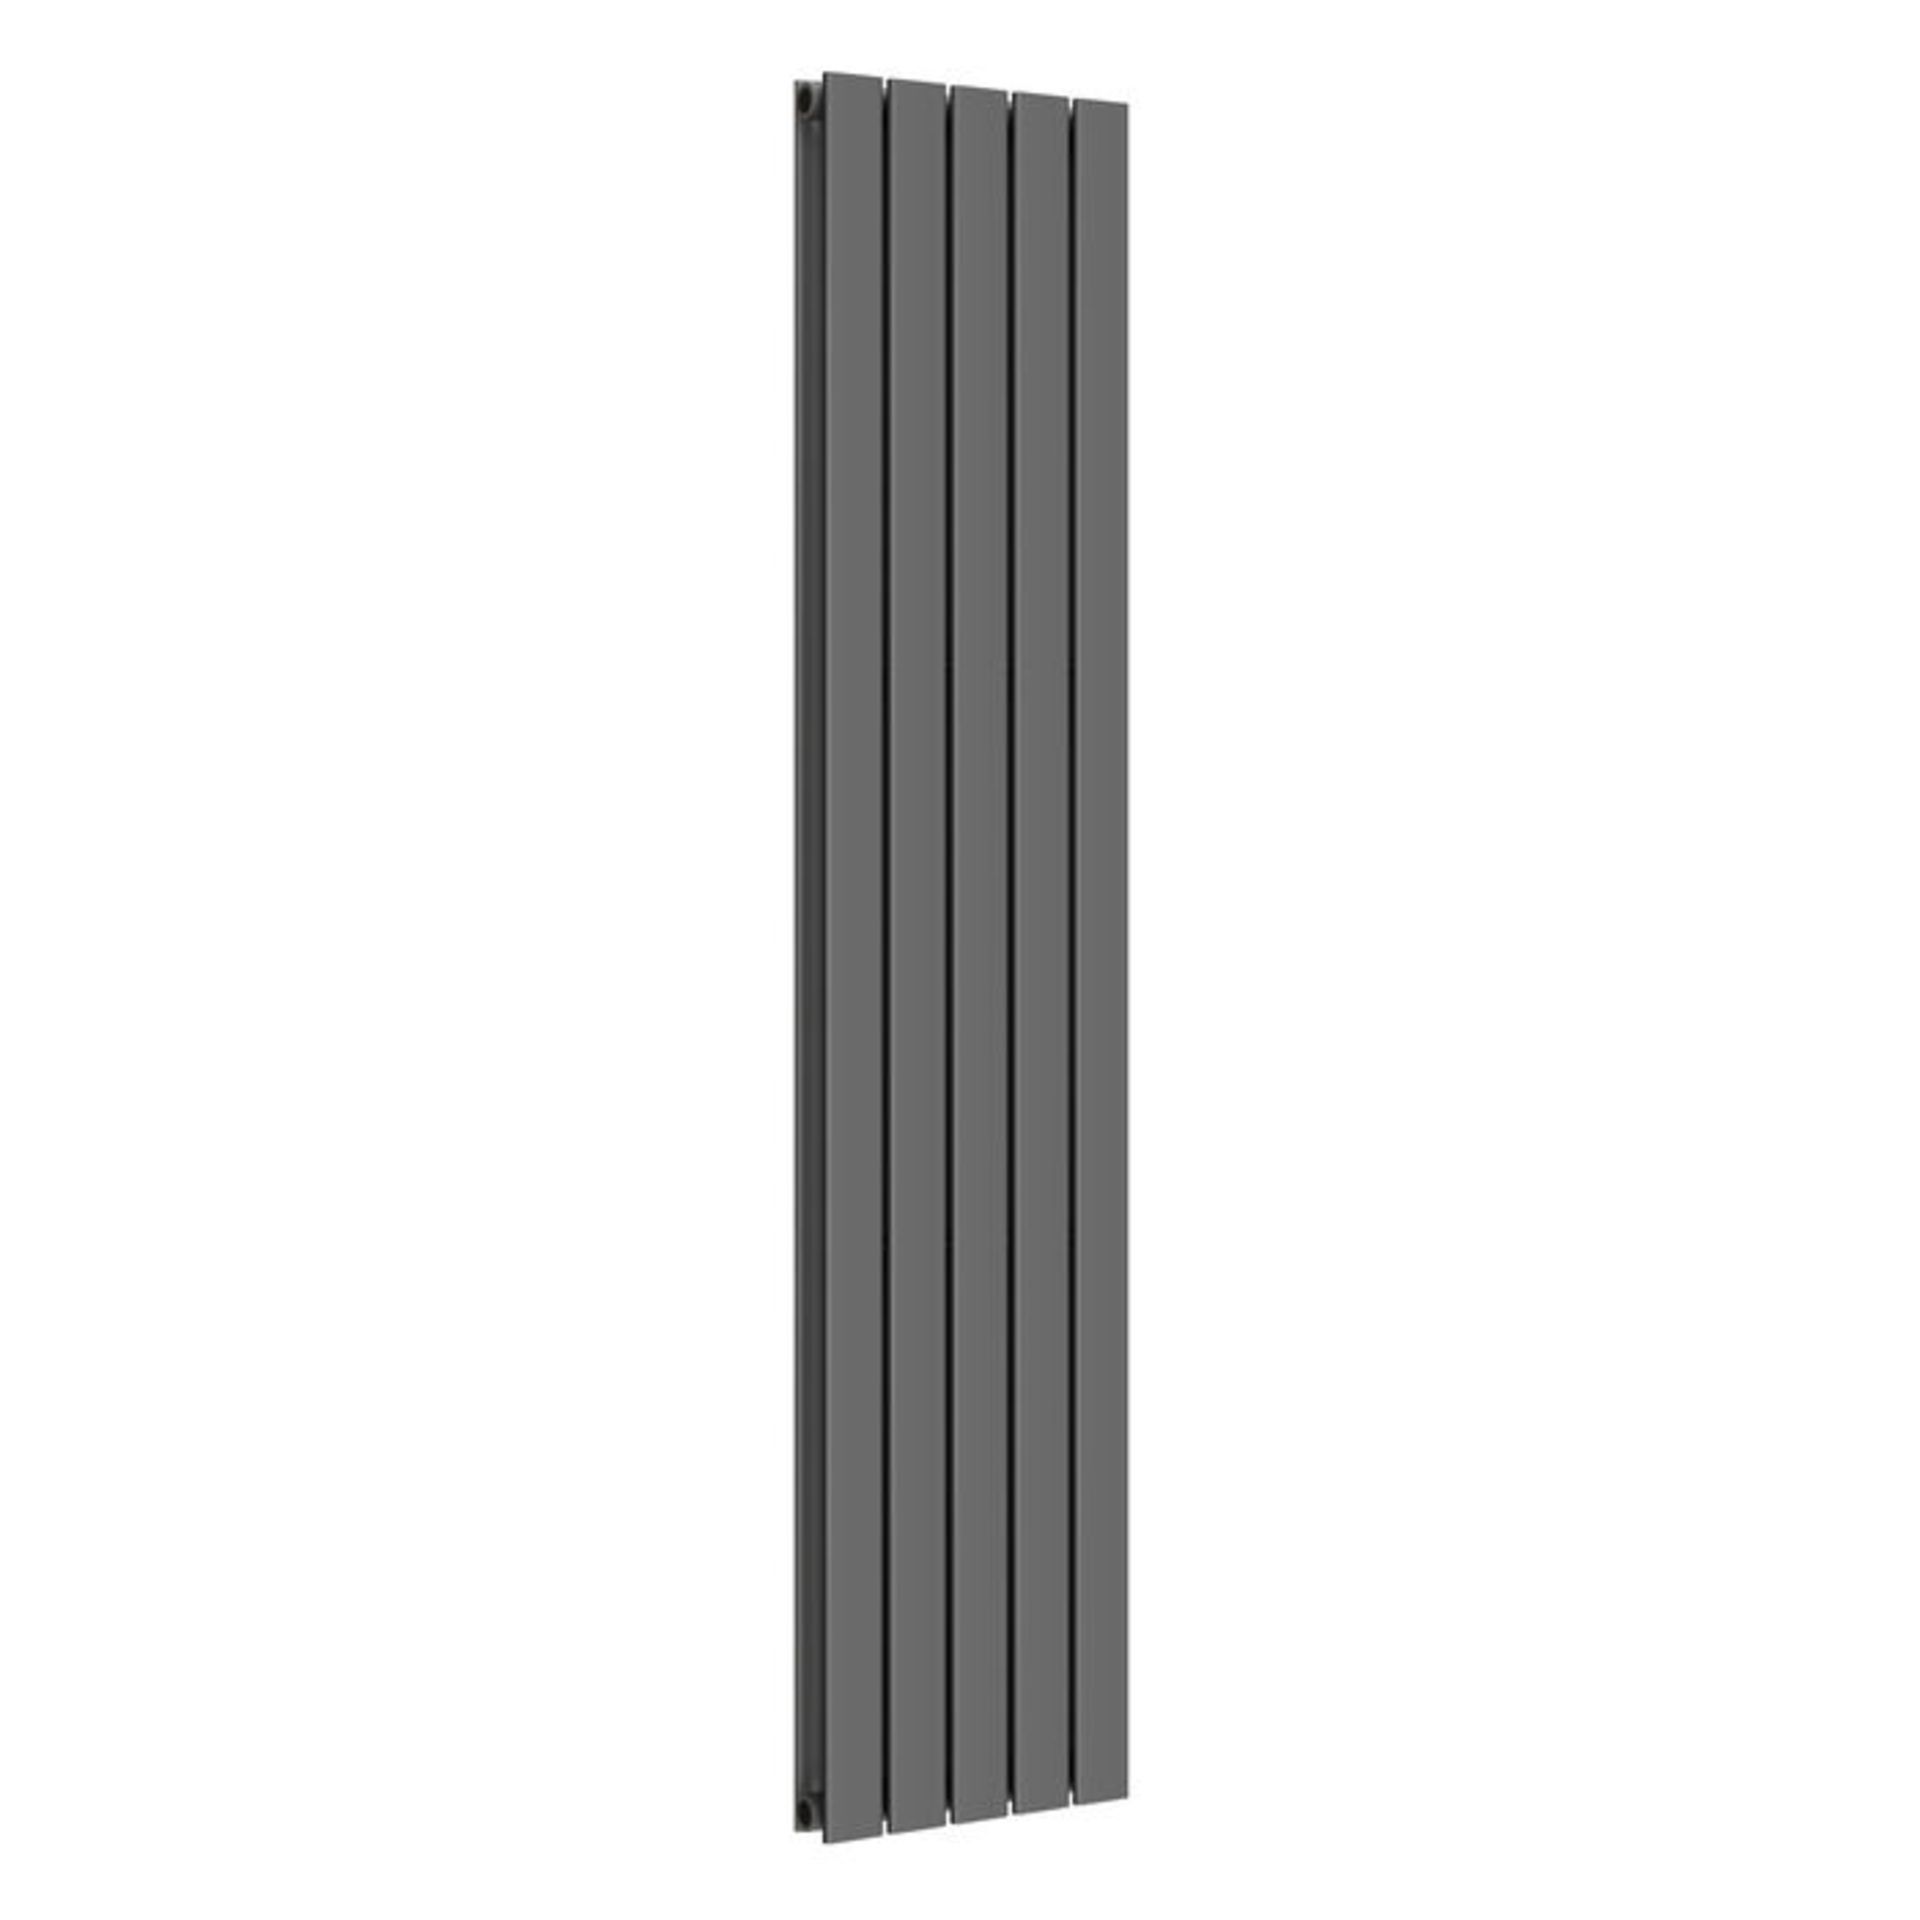 New & Boxed 1800x360mm Anthracite Single Flat Panel Vertical Radiator. RRP £449.99.Made With ... - Image 2 of 2